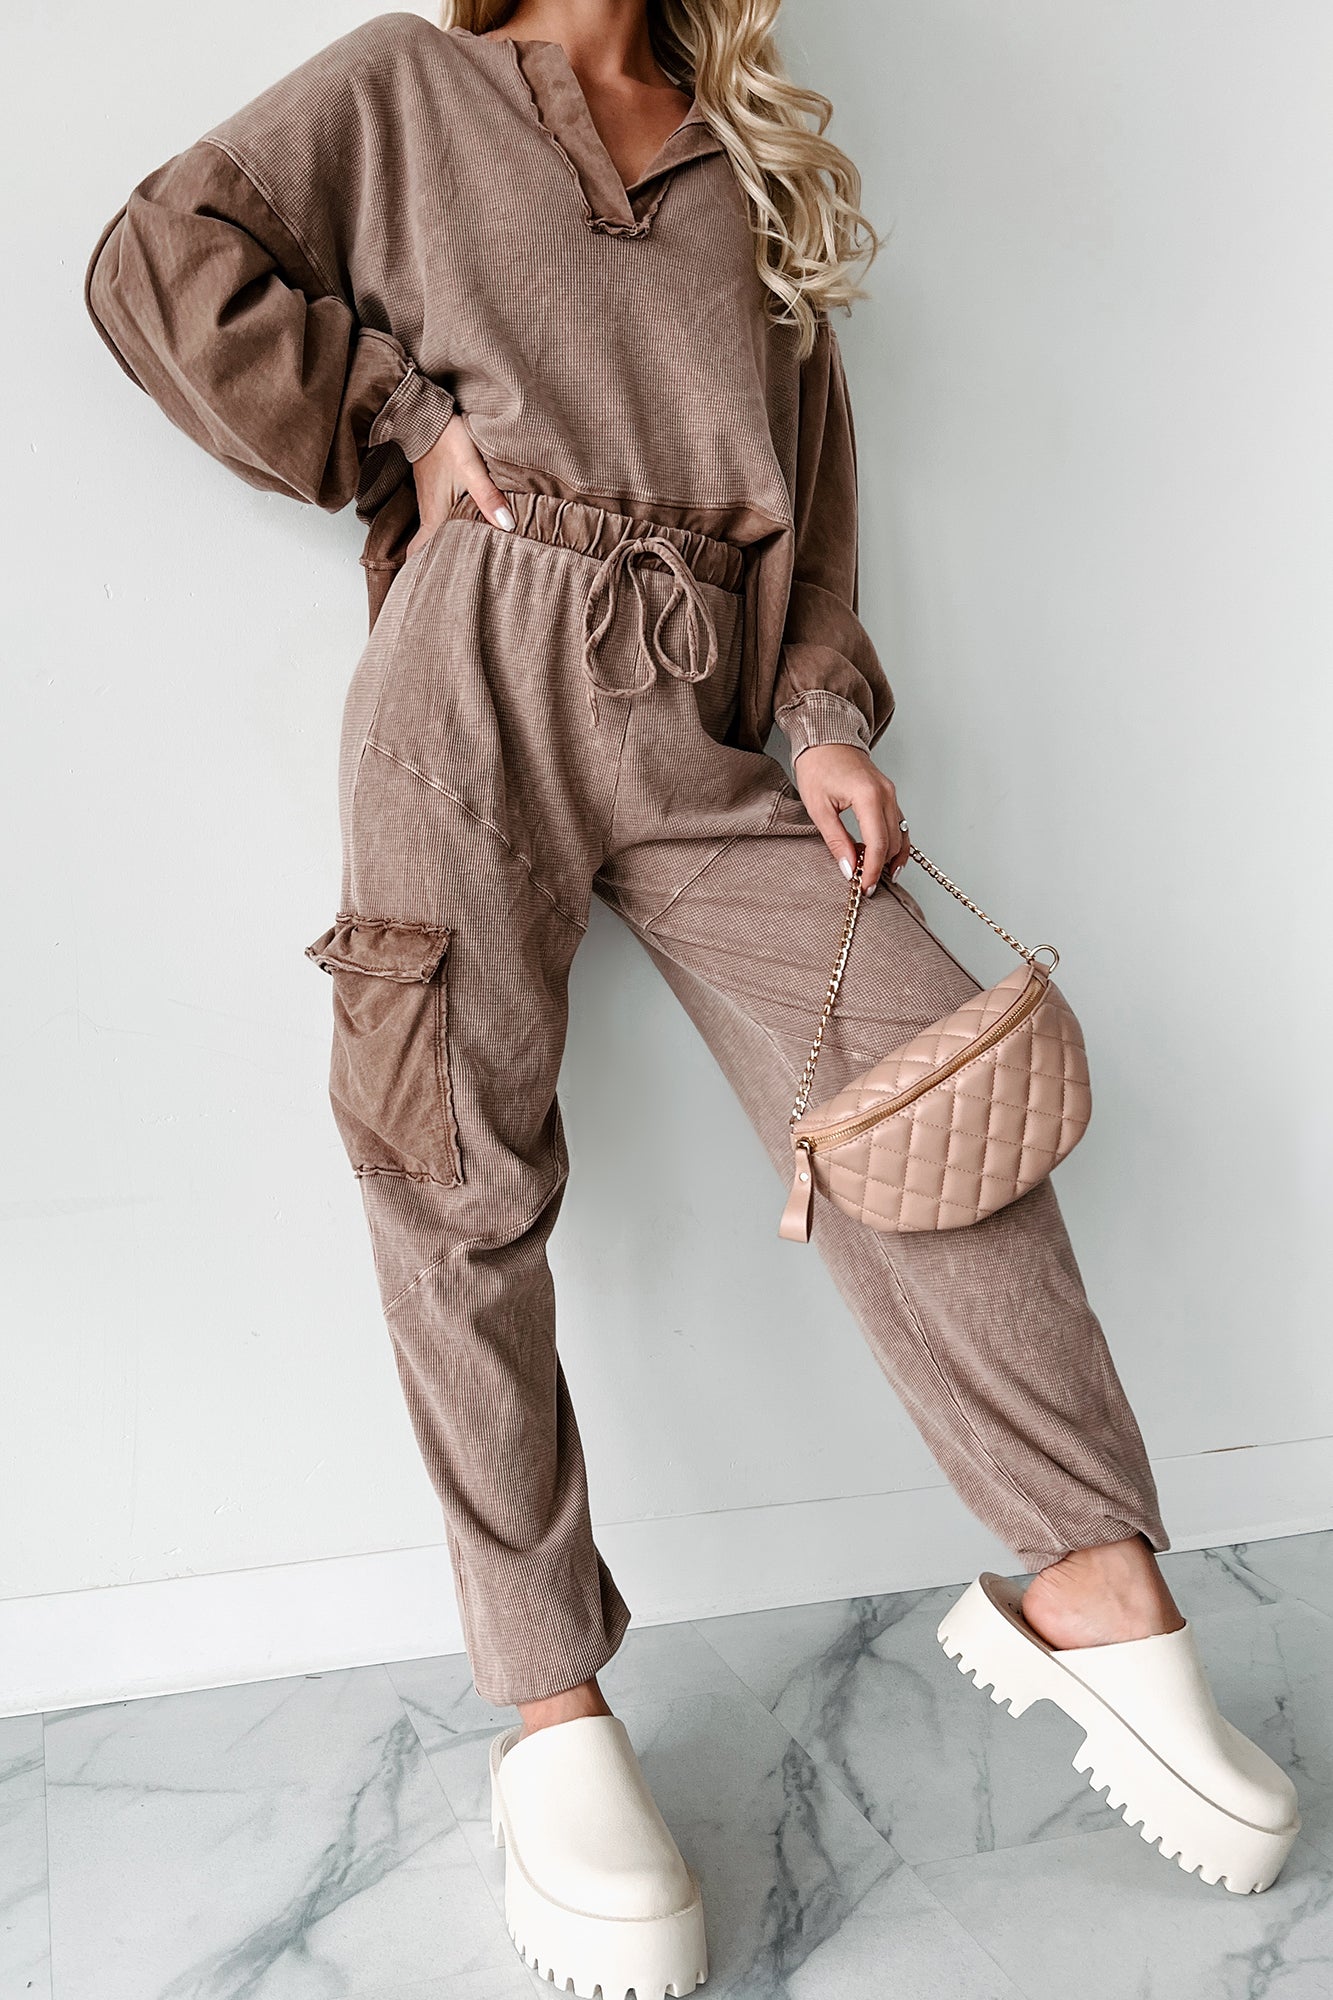 Long Wave Sleeve Cargo Denim Jumpsuit - Medium Wash Preorder Ships Early May